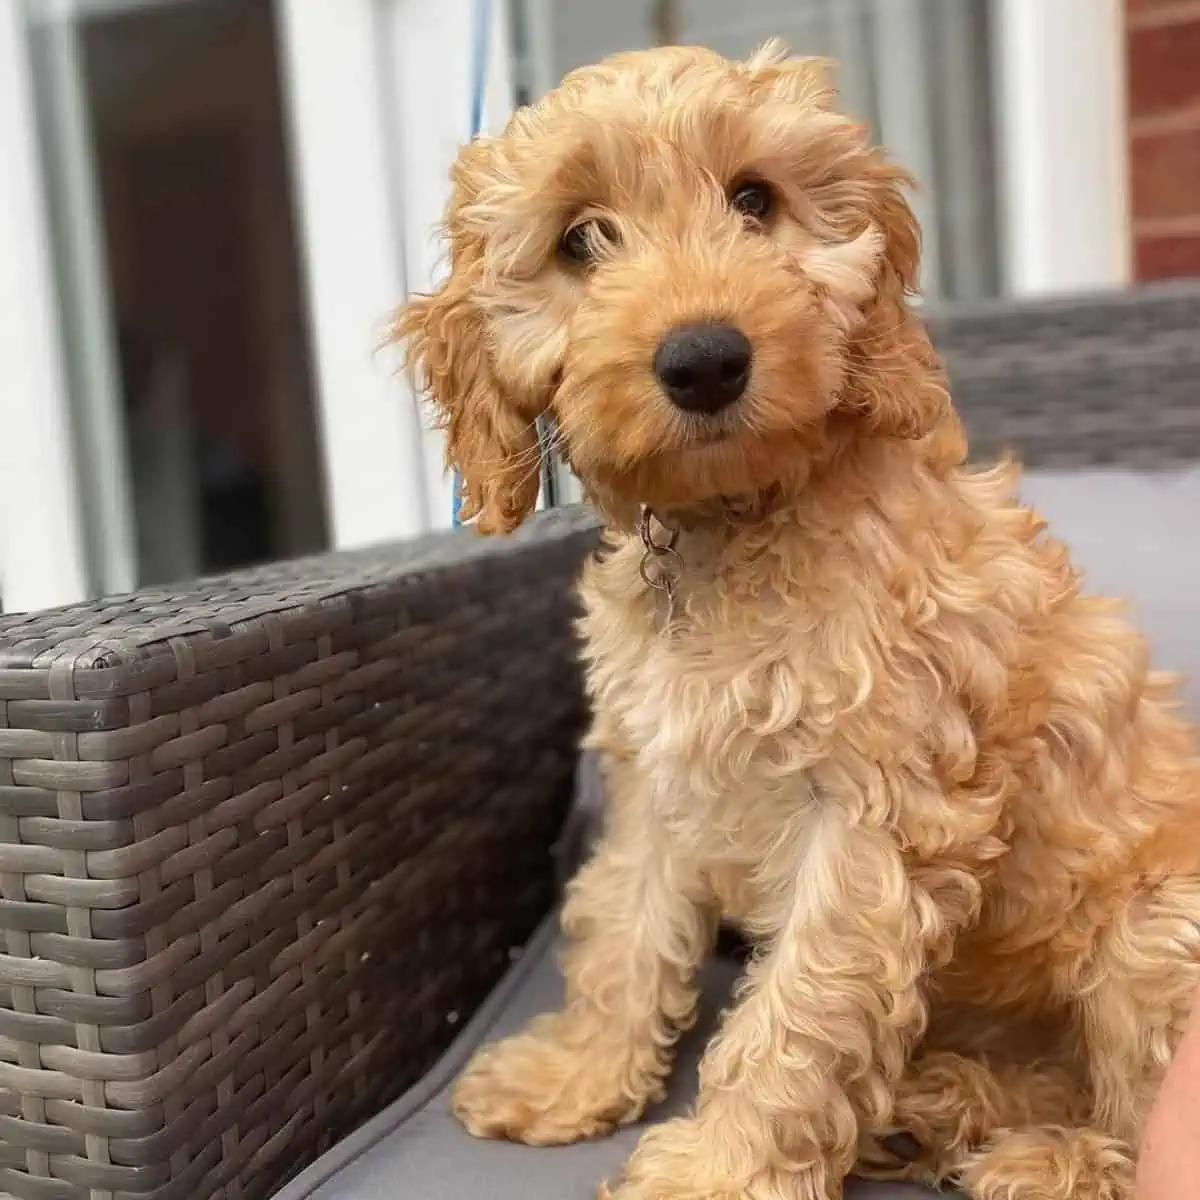 Cockapoo waiting for a treat